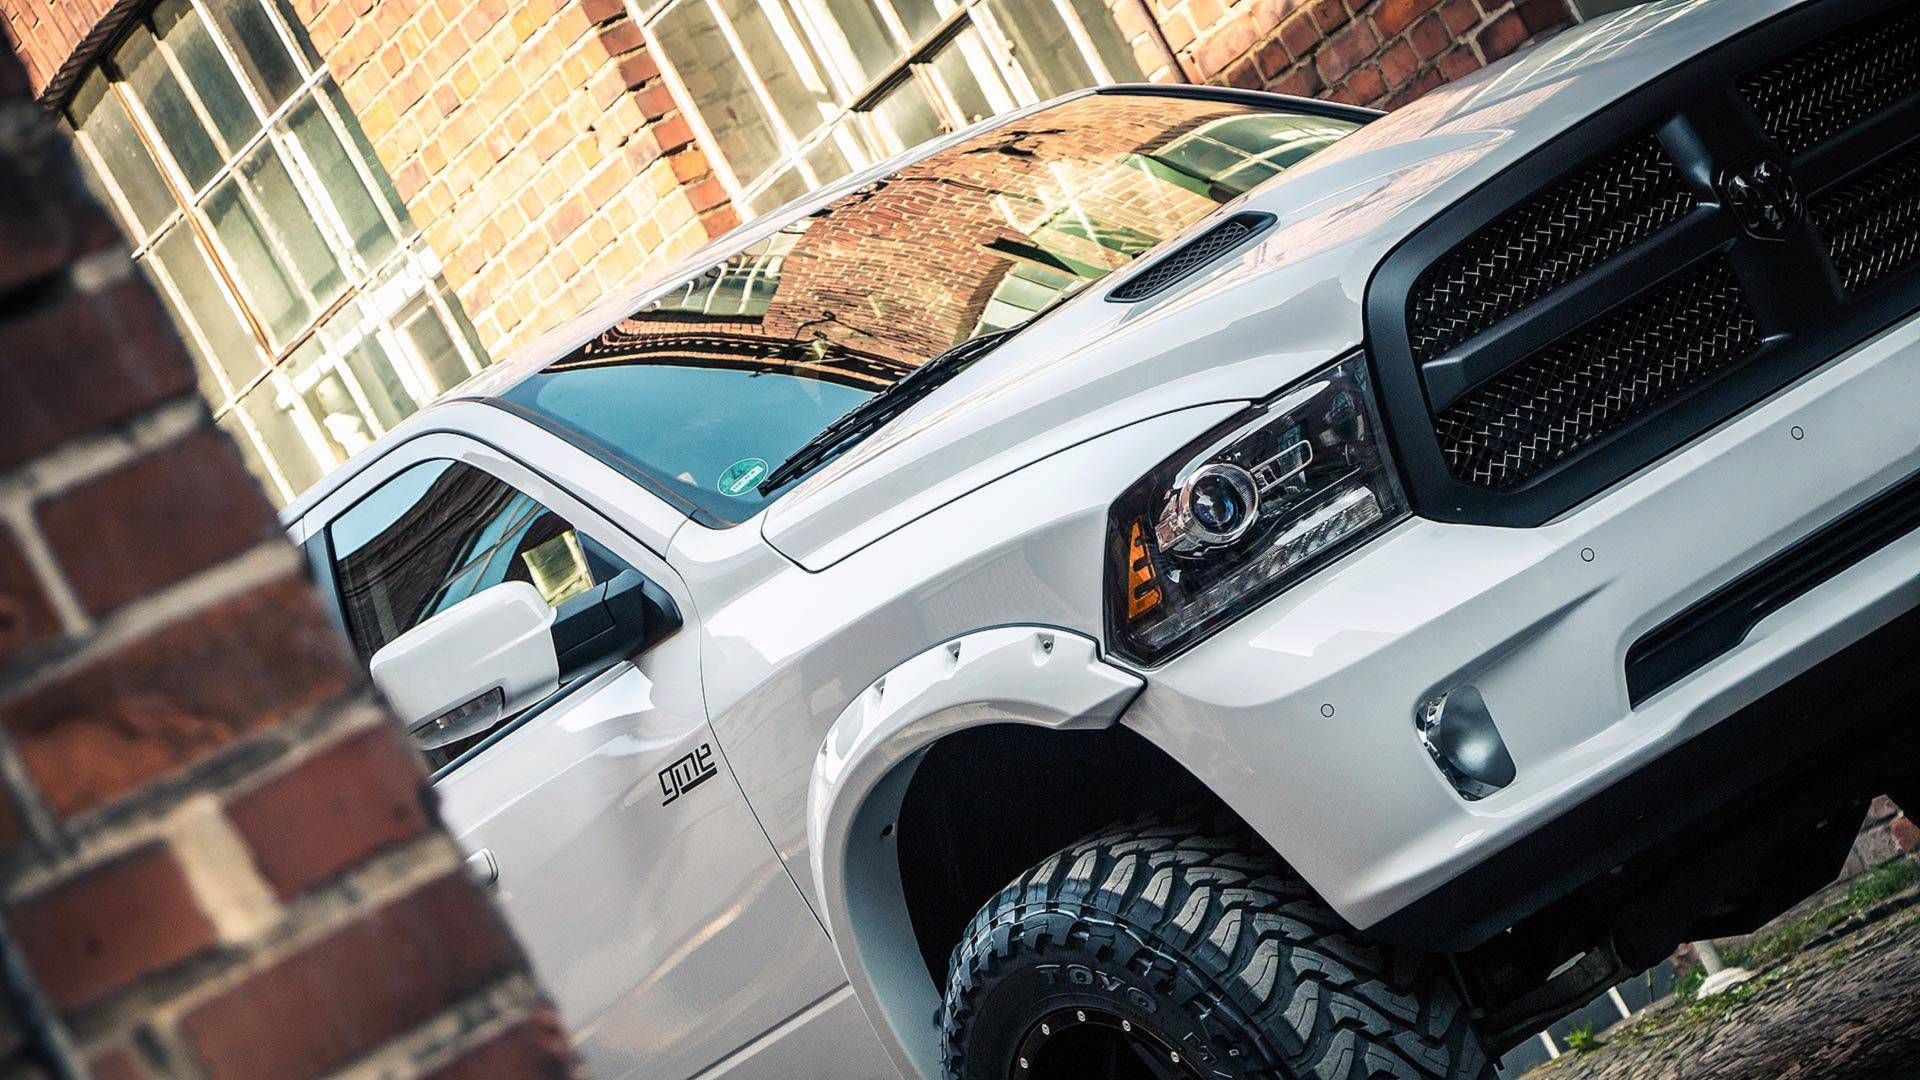 2019 Ram 1500 Off-Road Edition by GME